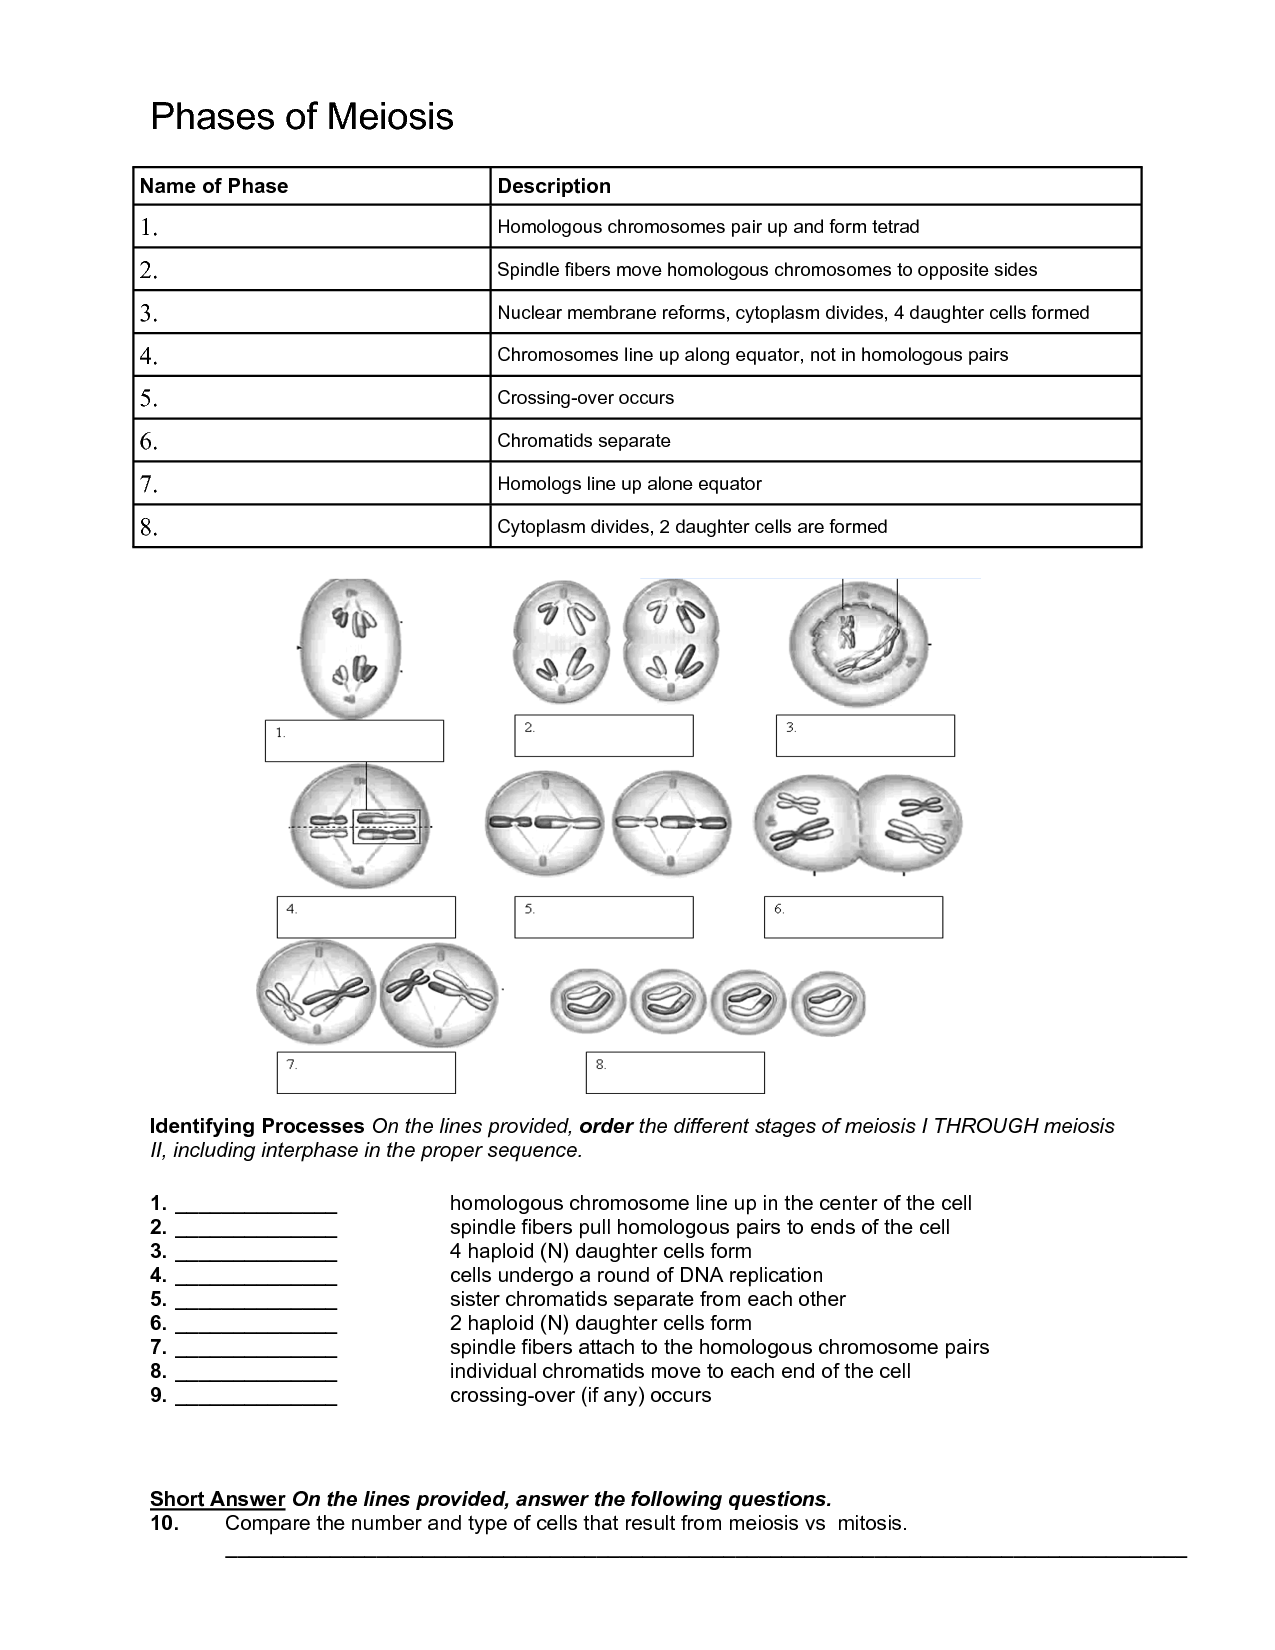 Meiosis Stages Worksheet Answers Image